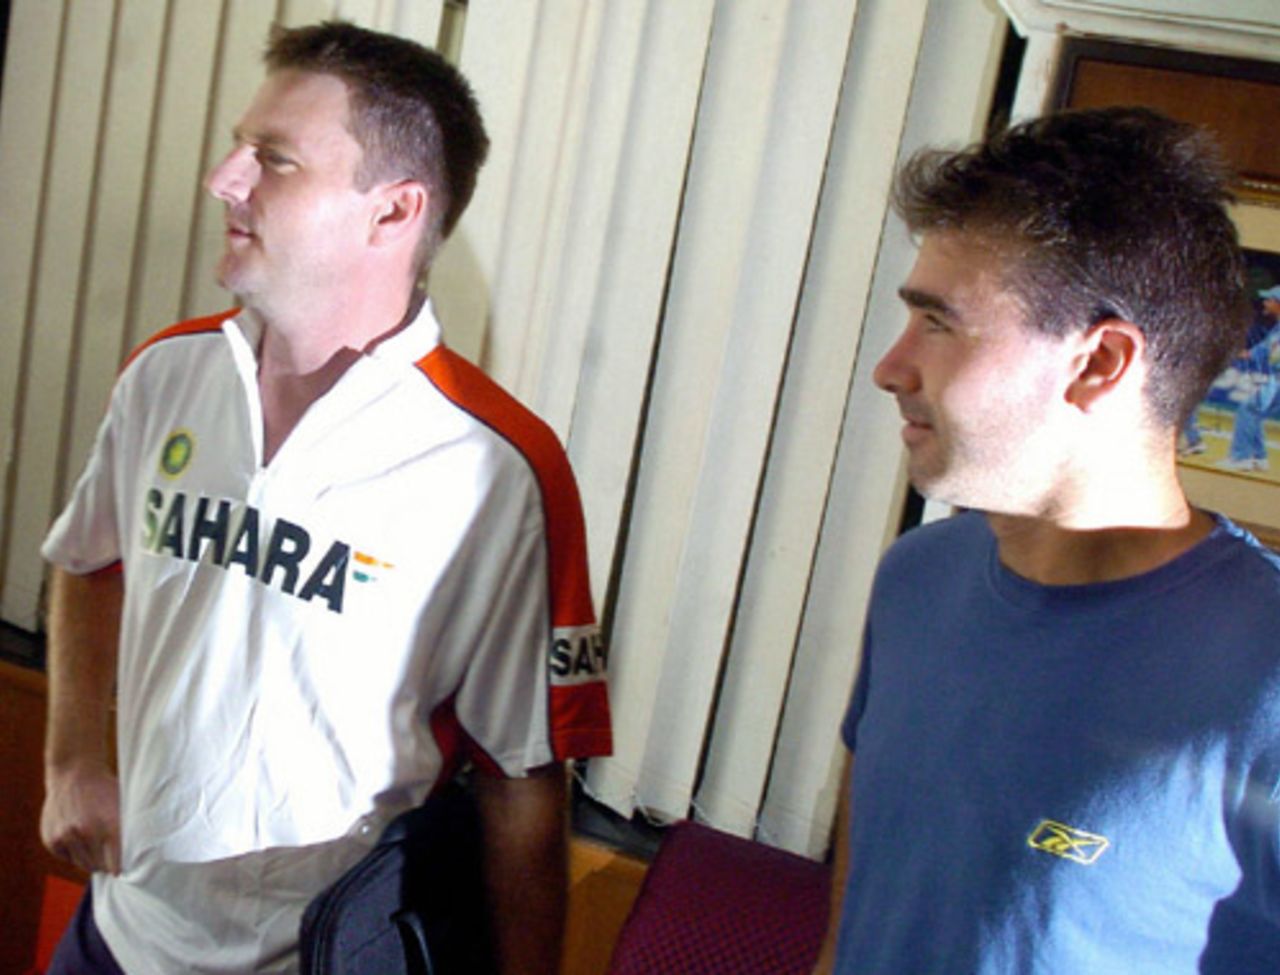 John Gloster and Greg King in discussion, Bangalore, June 16, 2005 